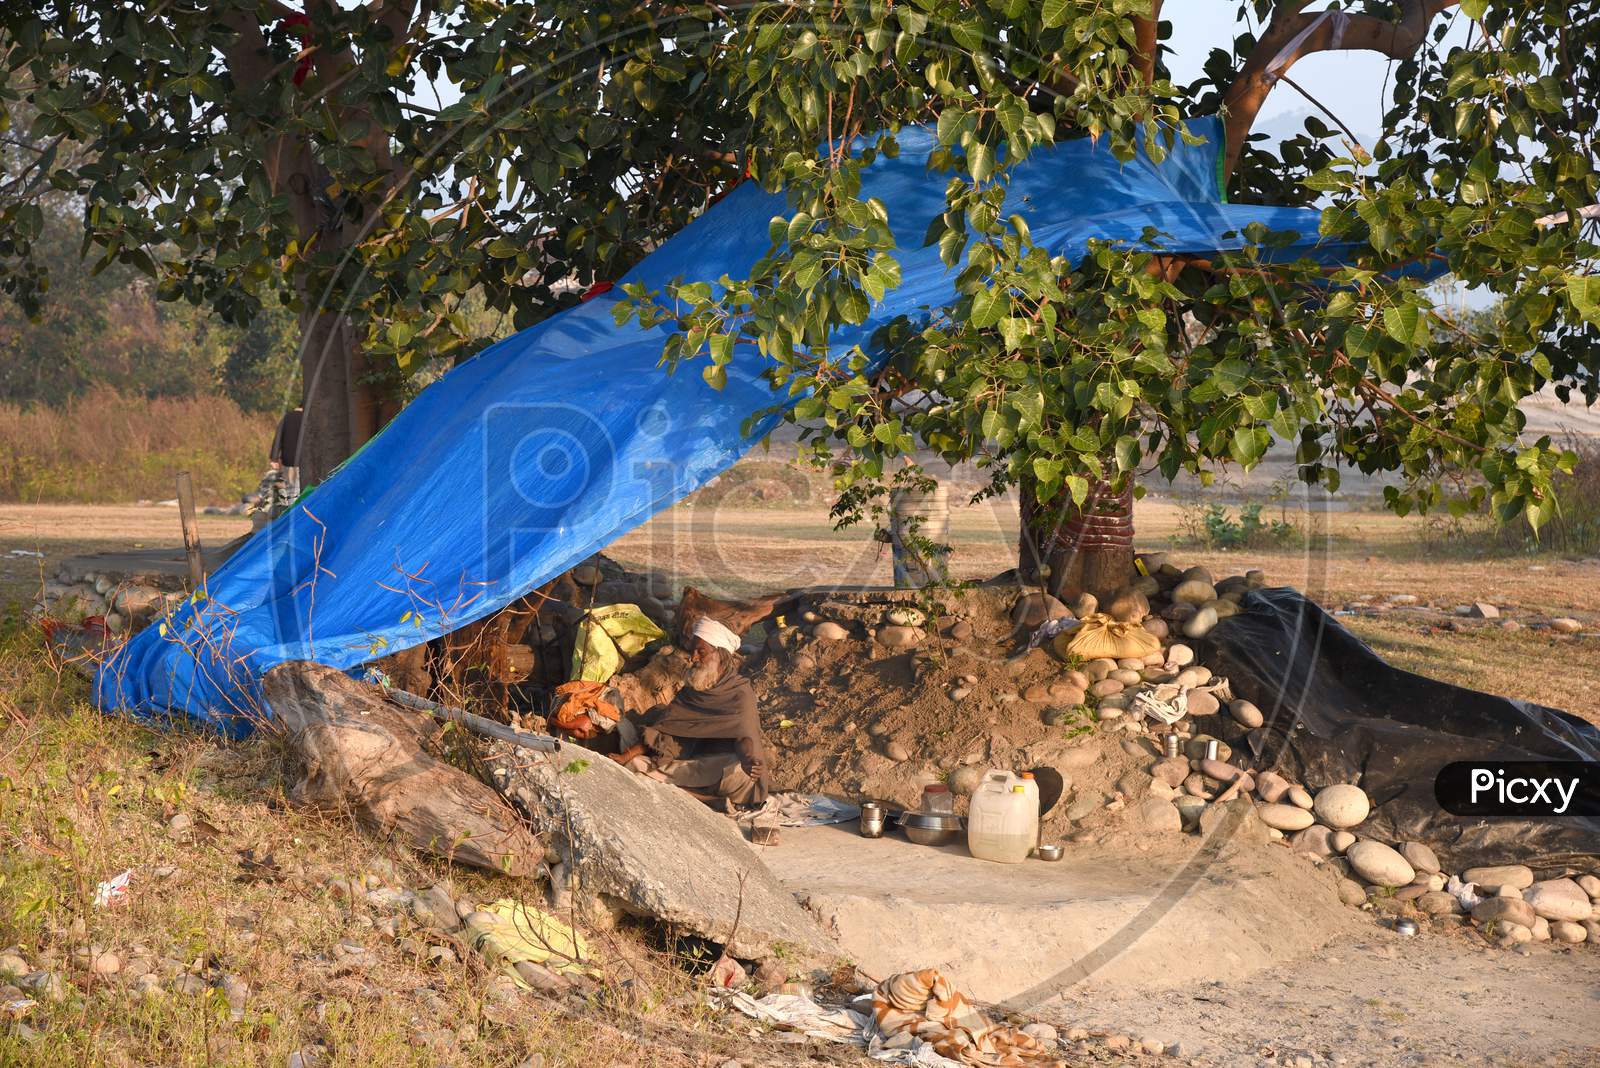 A Poor Elderly Man Living in a Road Side Tent